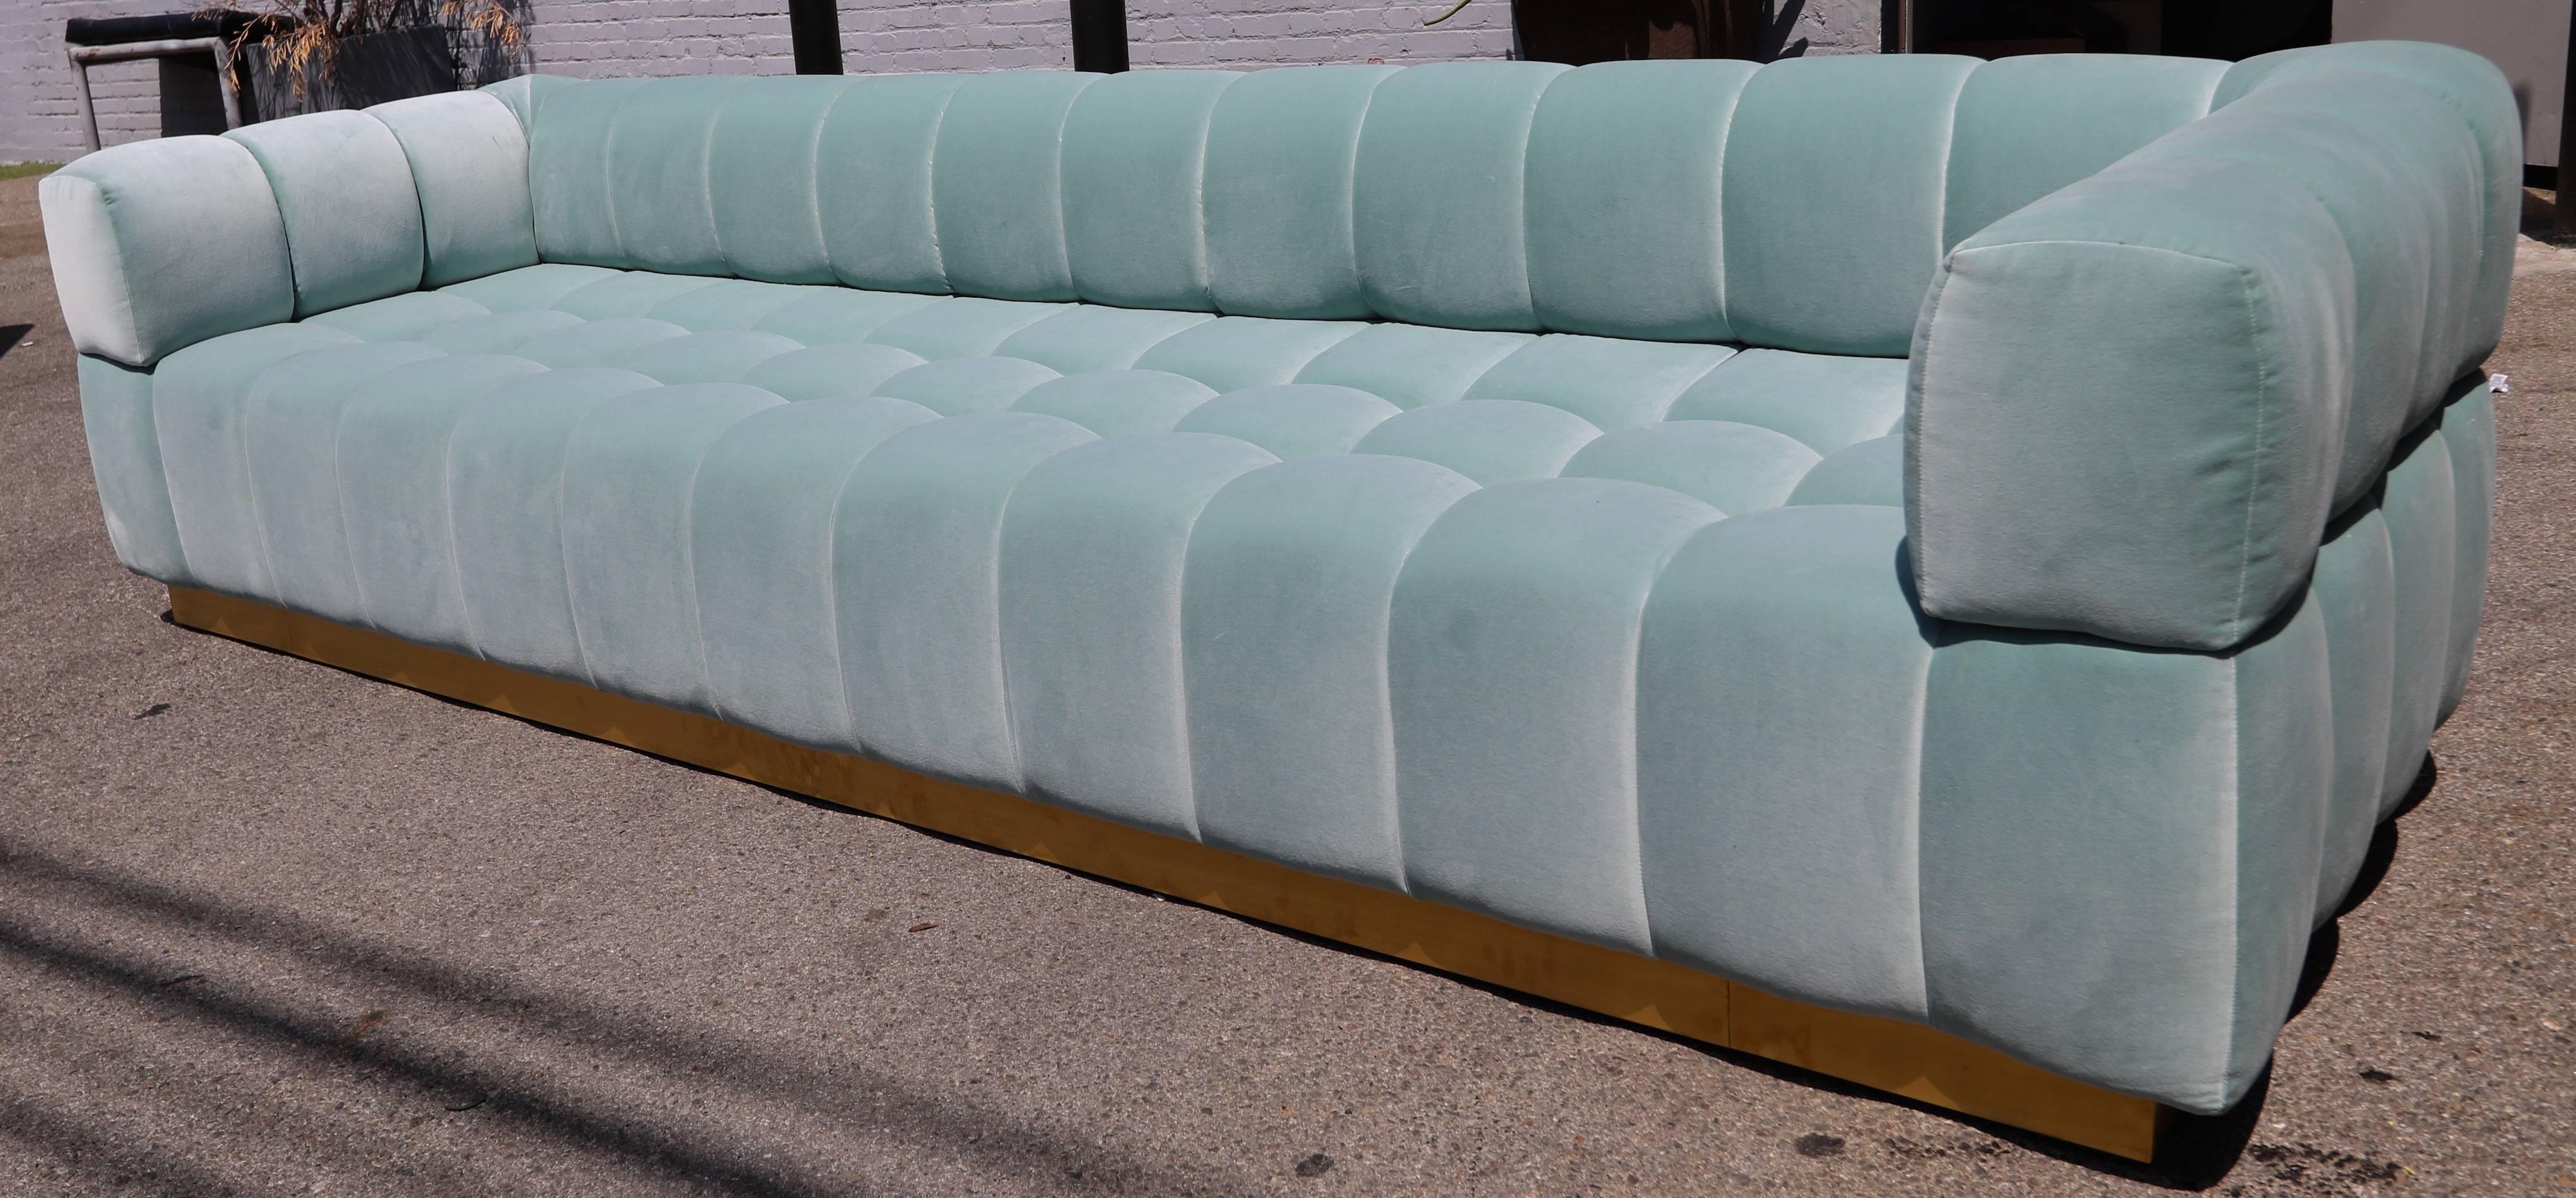 American Custom Tufted Aqua Blue Velvet Sofa with Brass Base by Adesso Imports For Sale